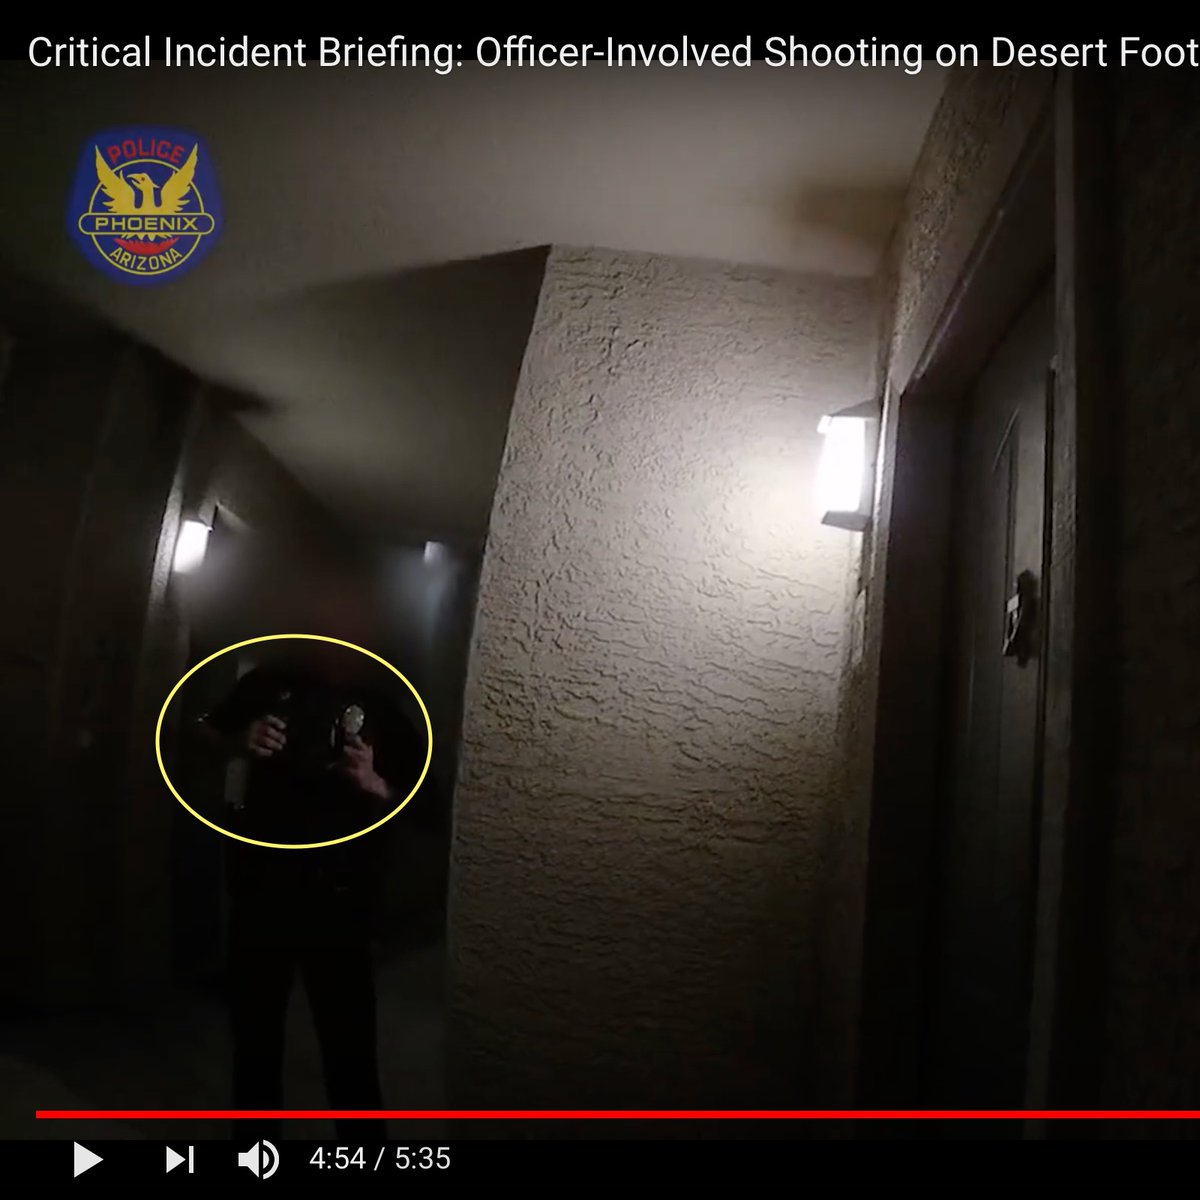 THREADPhoenix Arizona police shooting broken down: 1) Police arrive after 2 domestic disturbance calls from neighbor2) 2 officers arrive, knock, announce "Phoenix Police," then back away from door3) Officers do not have hands on their guns